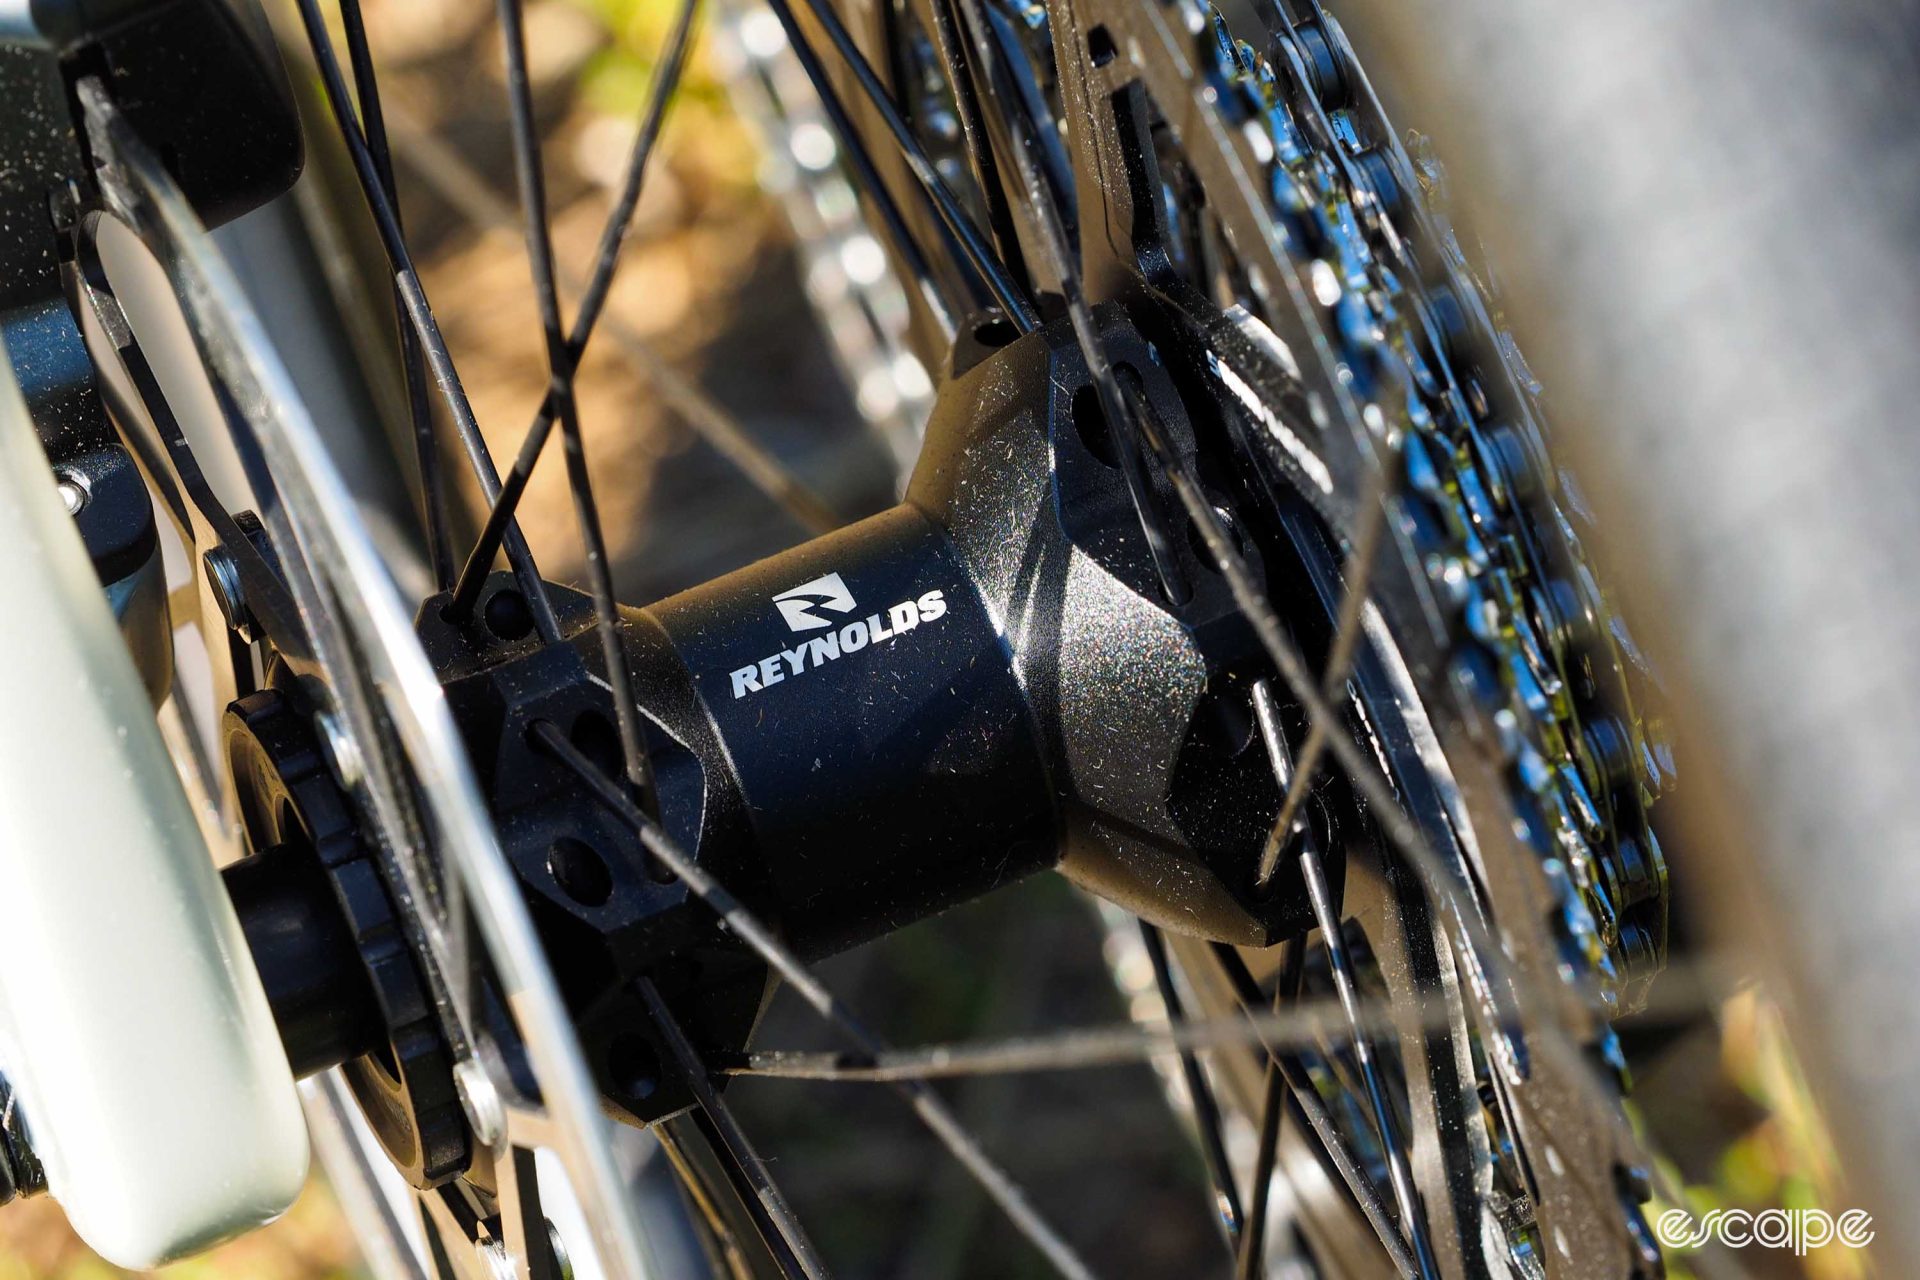 A closeup of the house-brand Reynolds rear hub, showing straight-pull spokes and center-lock rotor attachment.